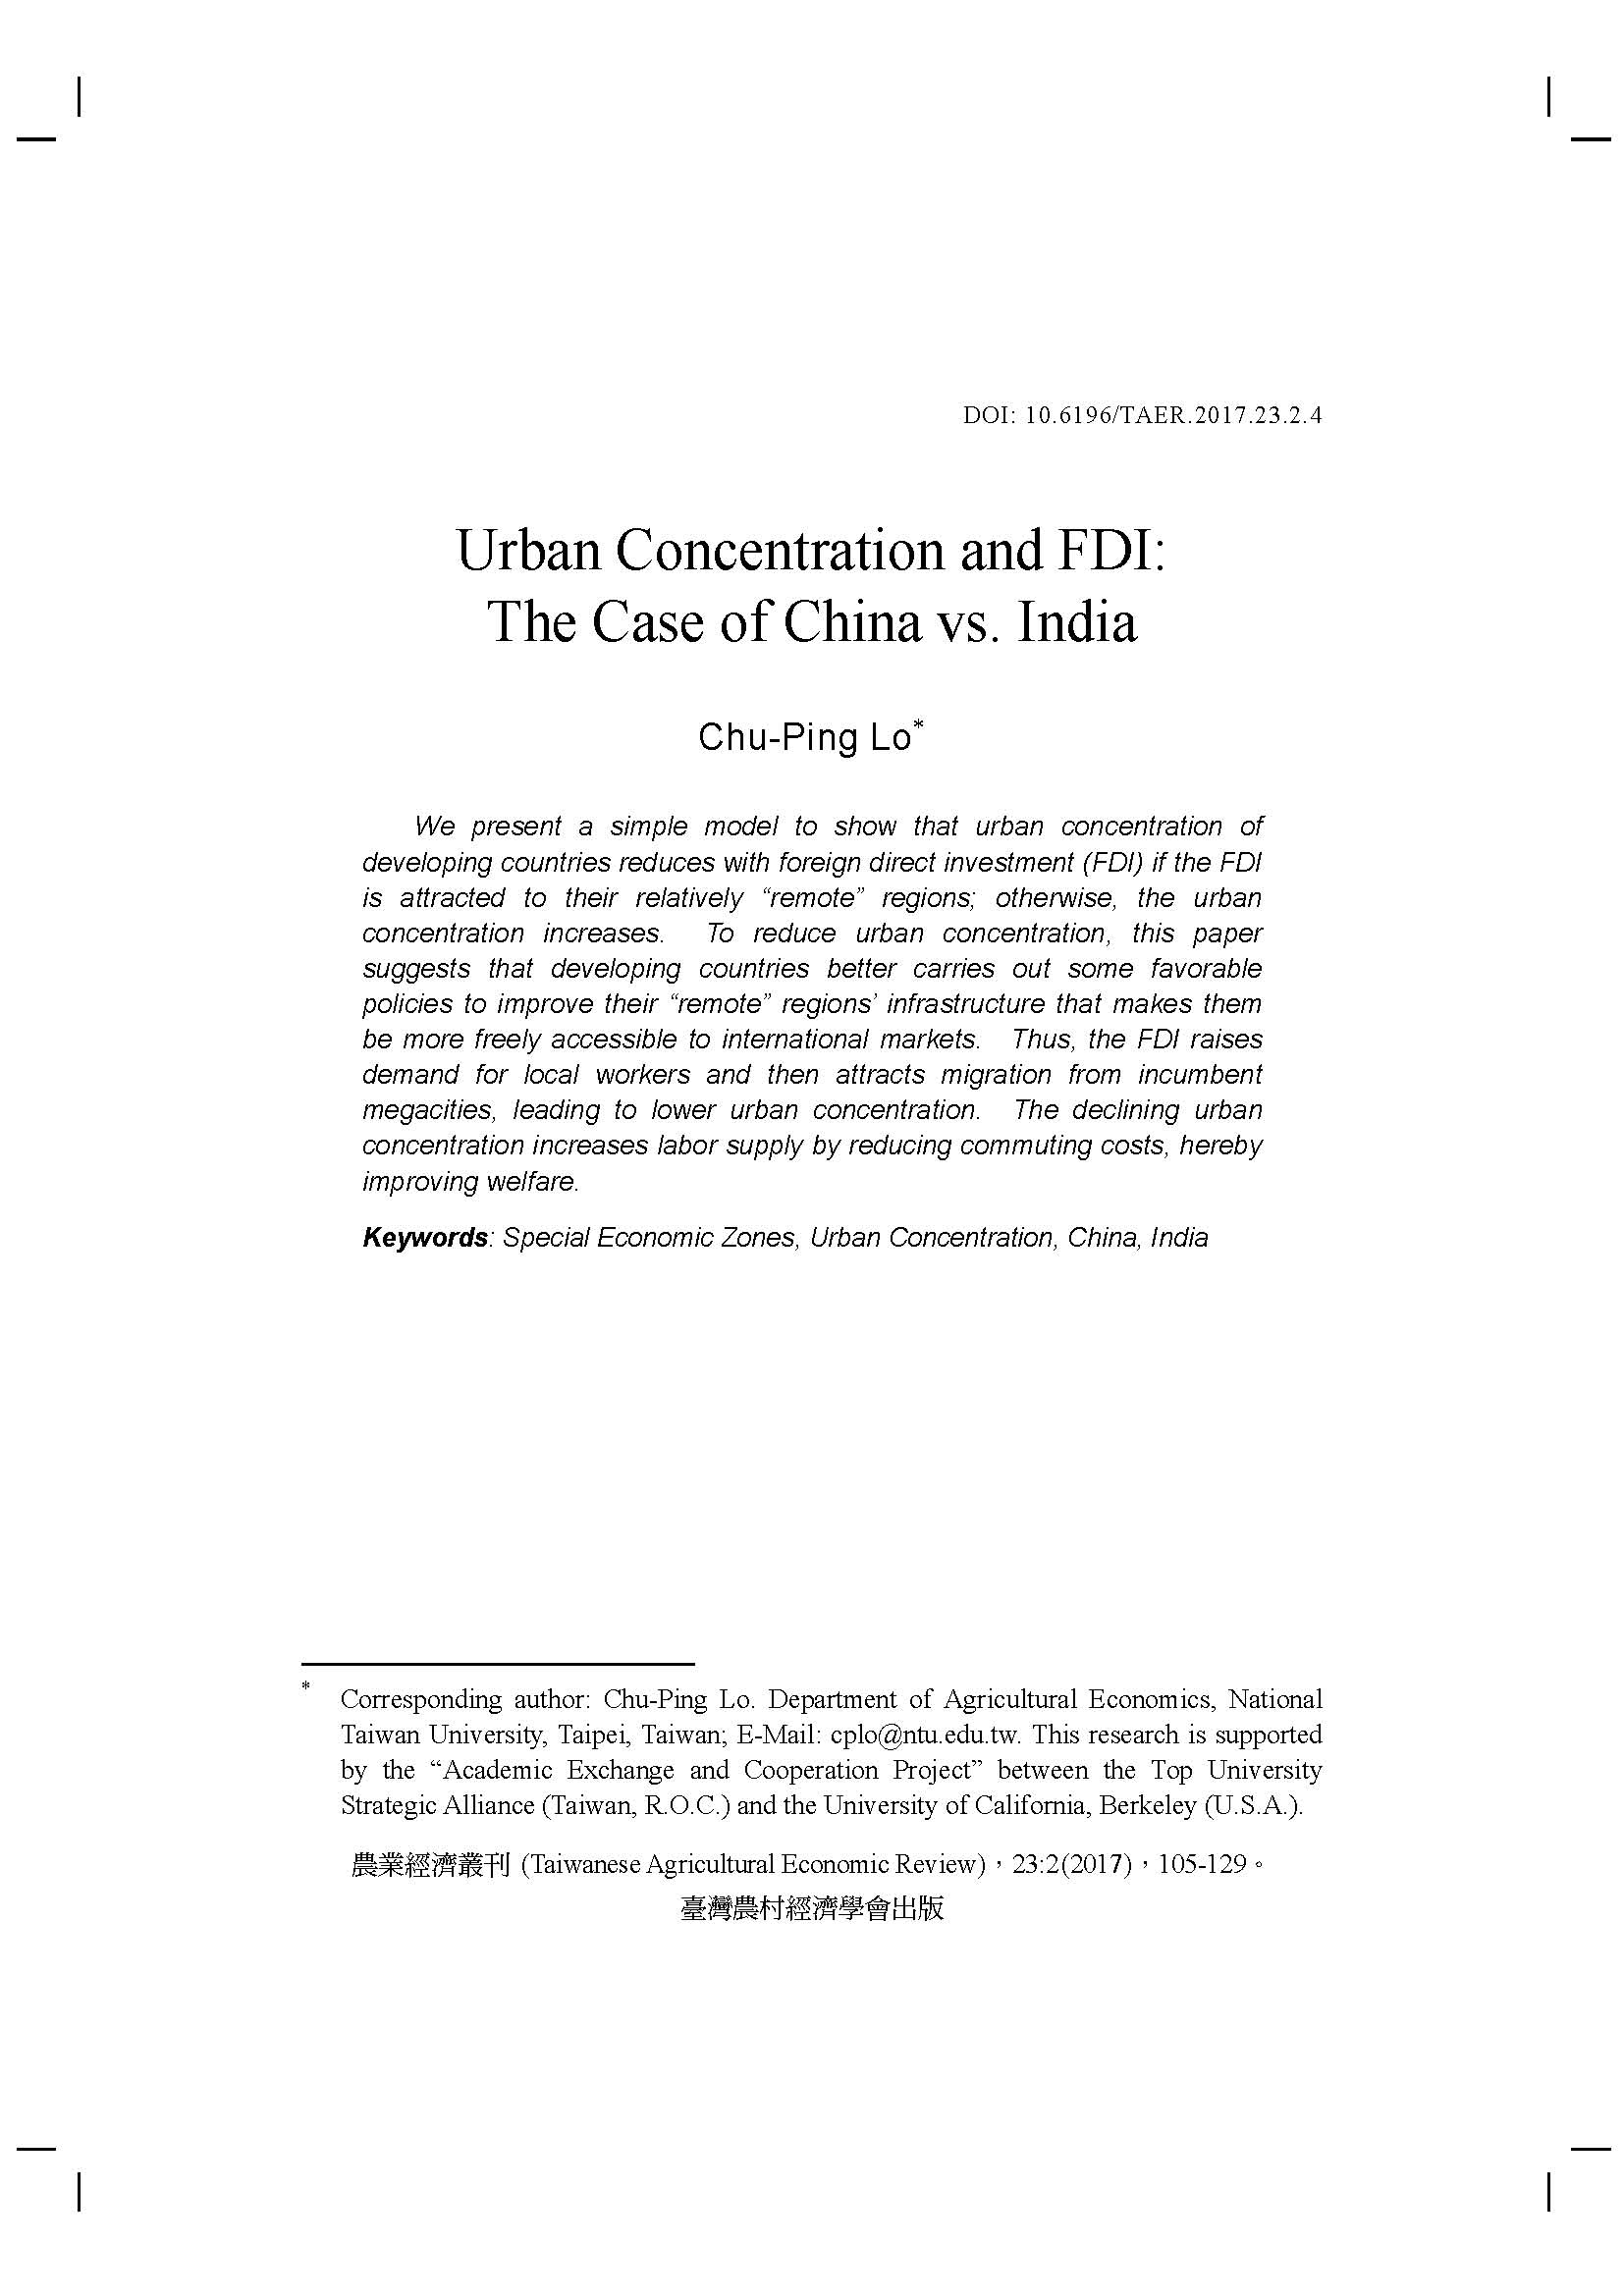 Urban_Concentration_and_FDI-The_Case_of_ChinavsIndia.jpg